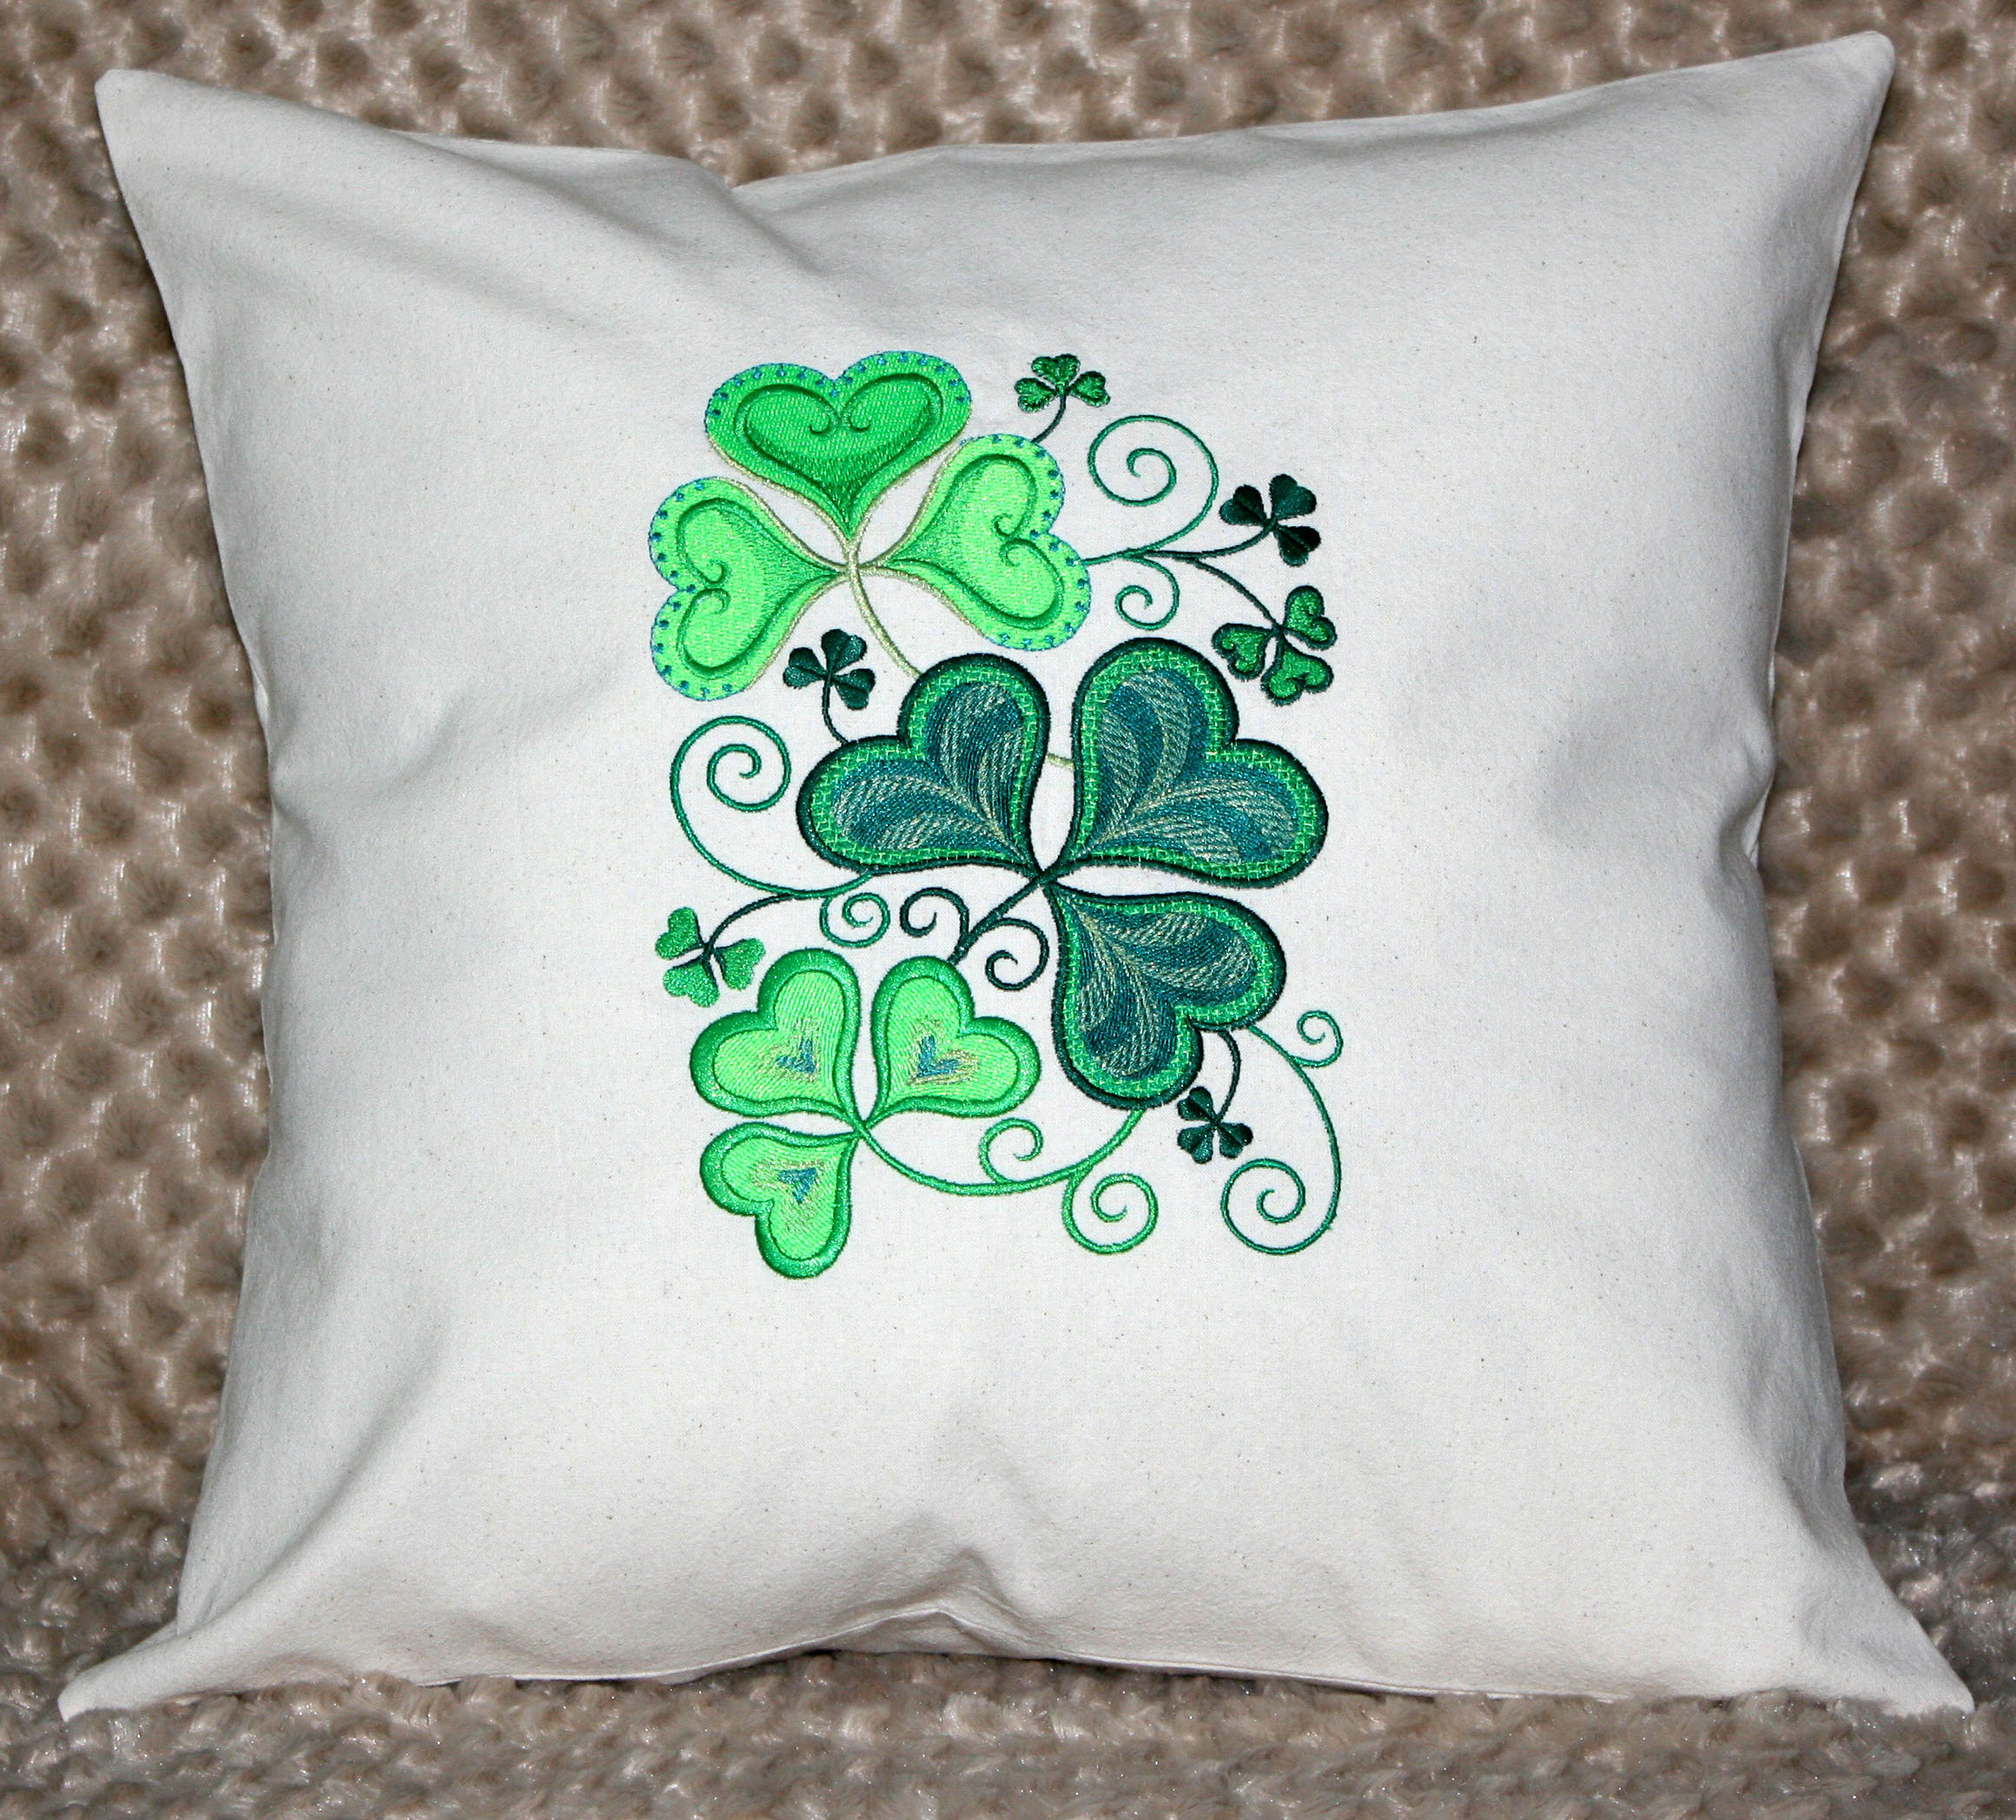 15 Enchanting Handmade St. Patrick's Day Pillow Designs That Make Great Gifts